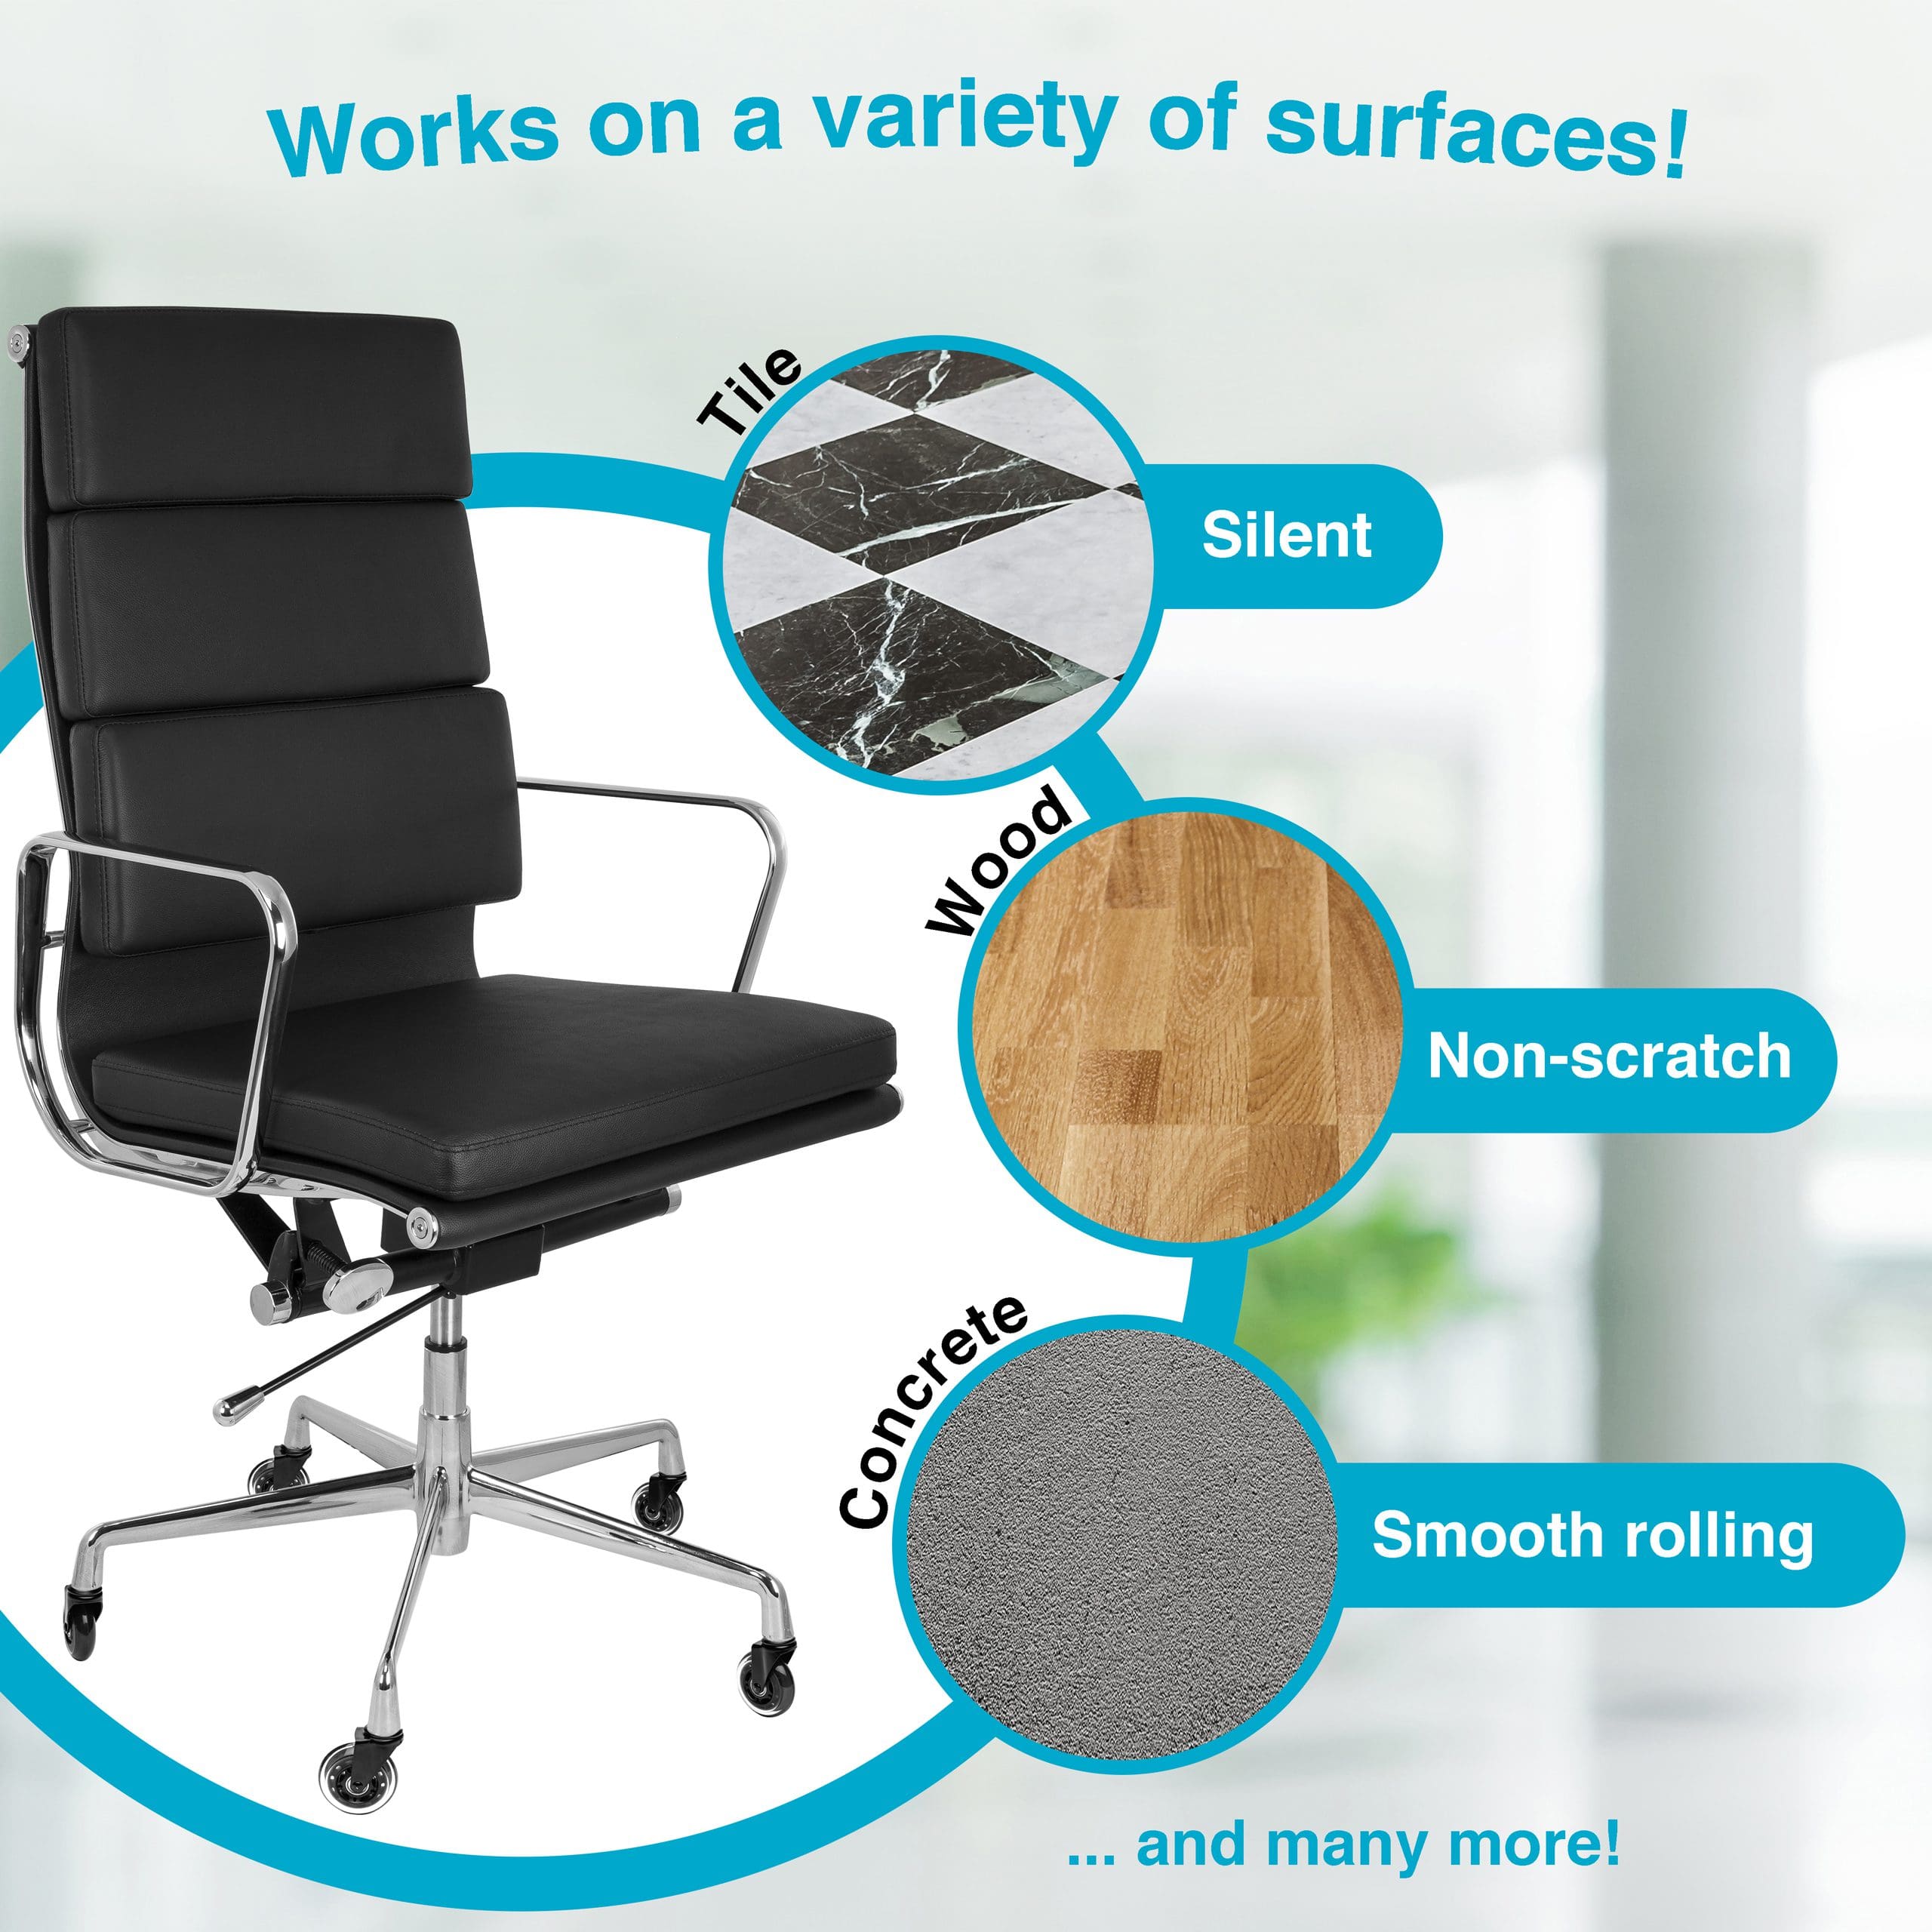 An office chair incorporated into an infographic layout.